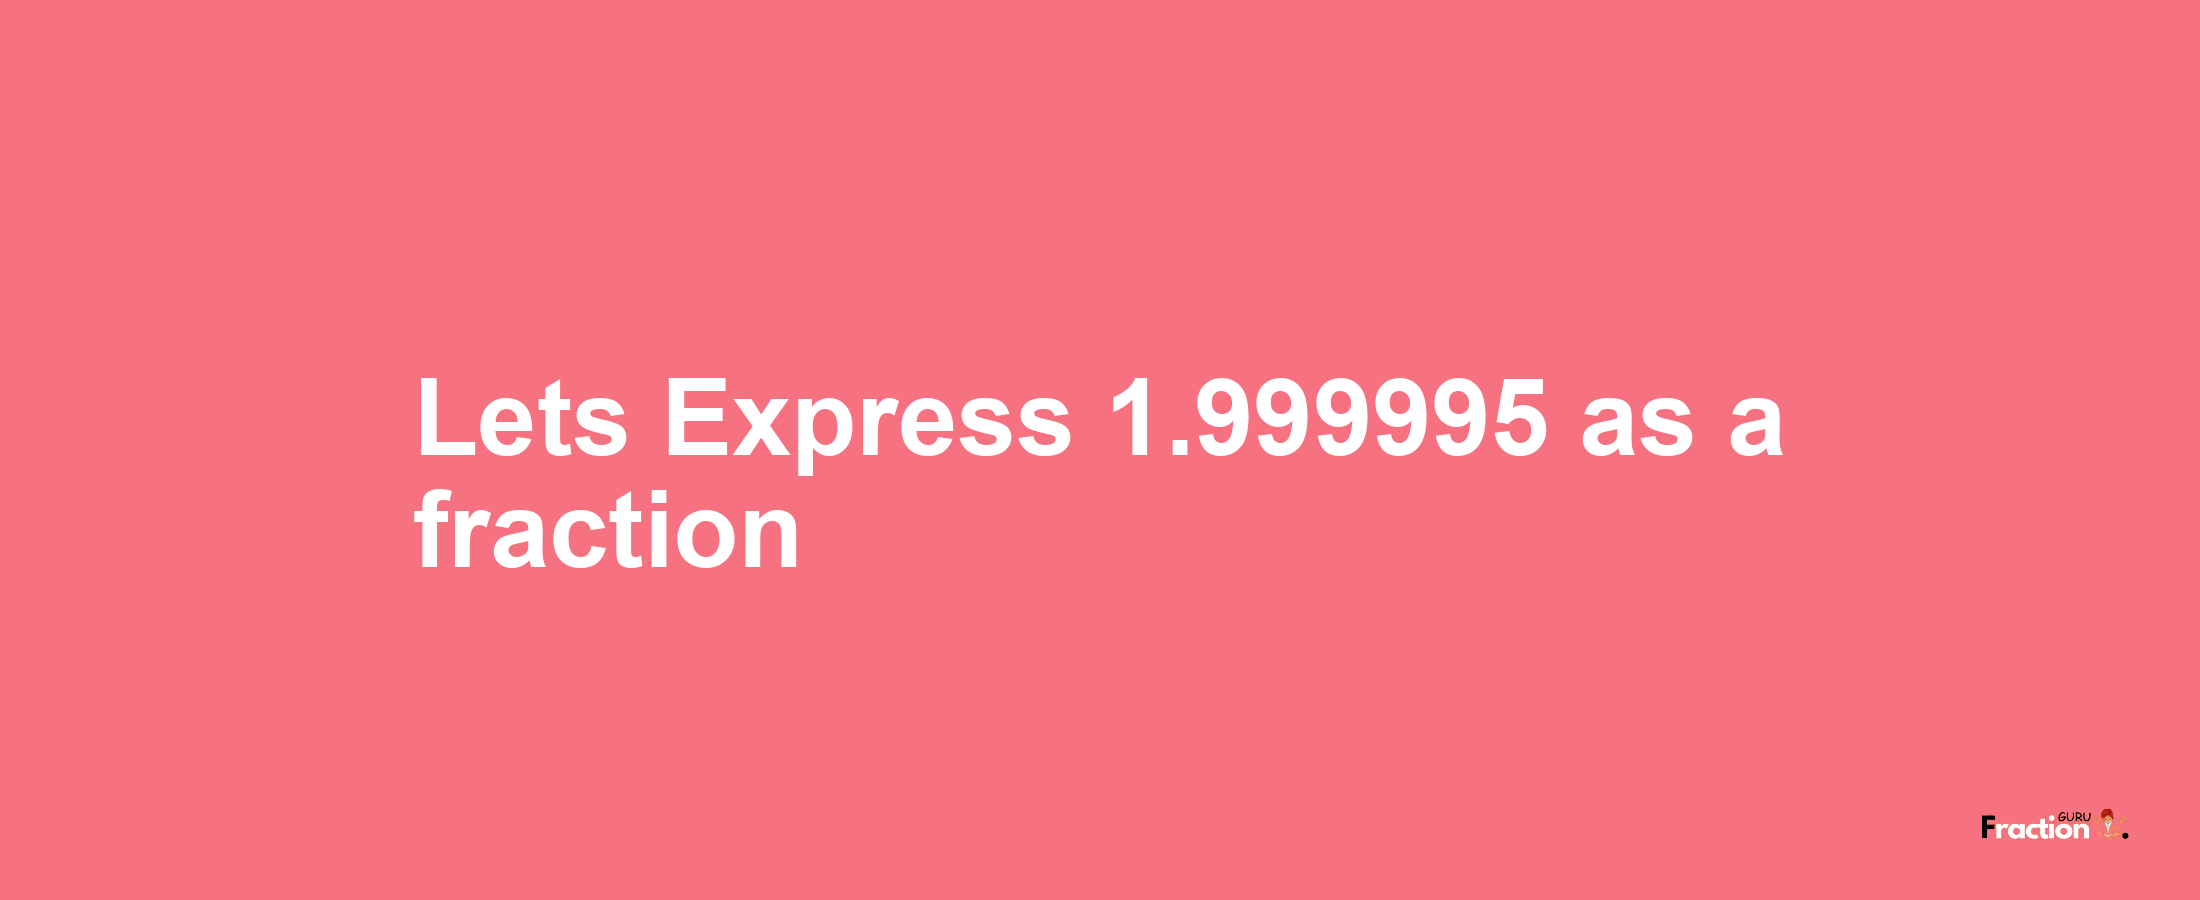 Lets Express 1.999995 as afraction